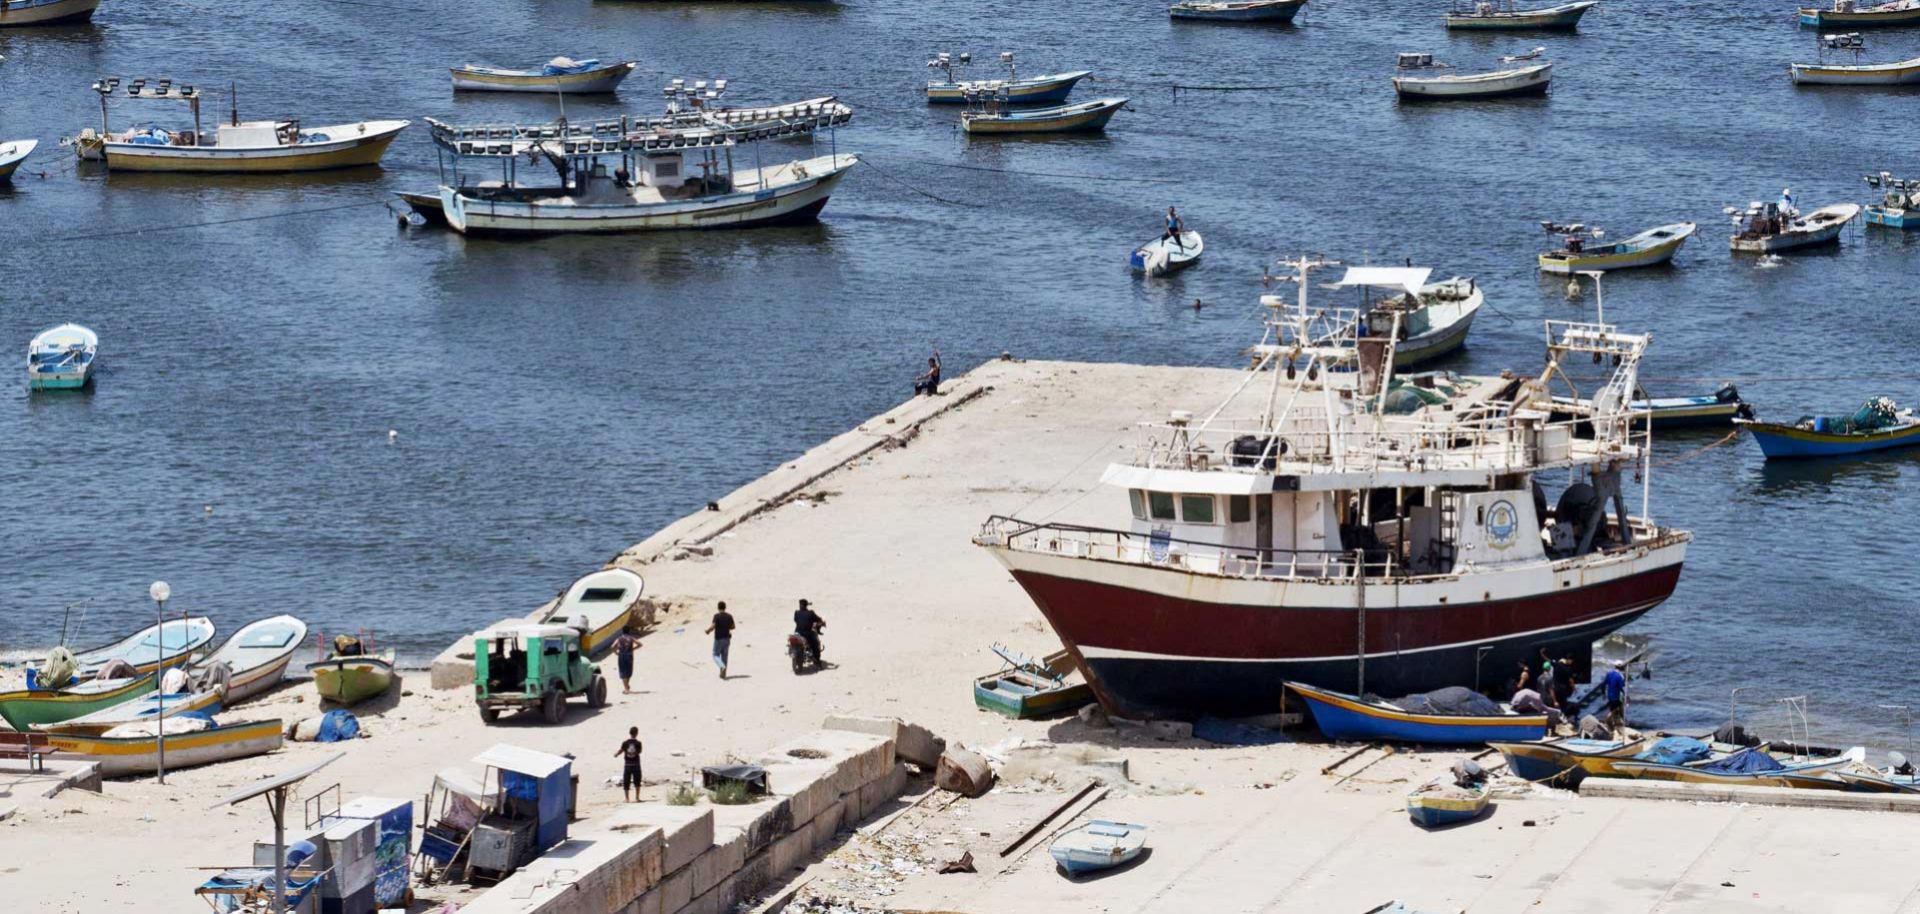 Fishing vessels are moored at Gaza City's harbour on August 18, 2014. Egyptian-brokered indirect negotiations between Israel and the Palestinians are taking place in Egypt during a five-day lull in the fighting that is due to expire at midnight (2100 GMT). The Palestinians have rejected any call to disarm Gaza and are pushing for Israel to lift its eight-year blockade on the coastal territory and also want the establishment of a sea port and an airport. AFP PHOTO/ROBERTO SCHMIDT (Photo credit should read RO